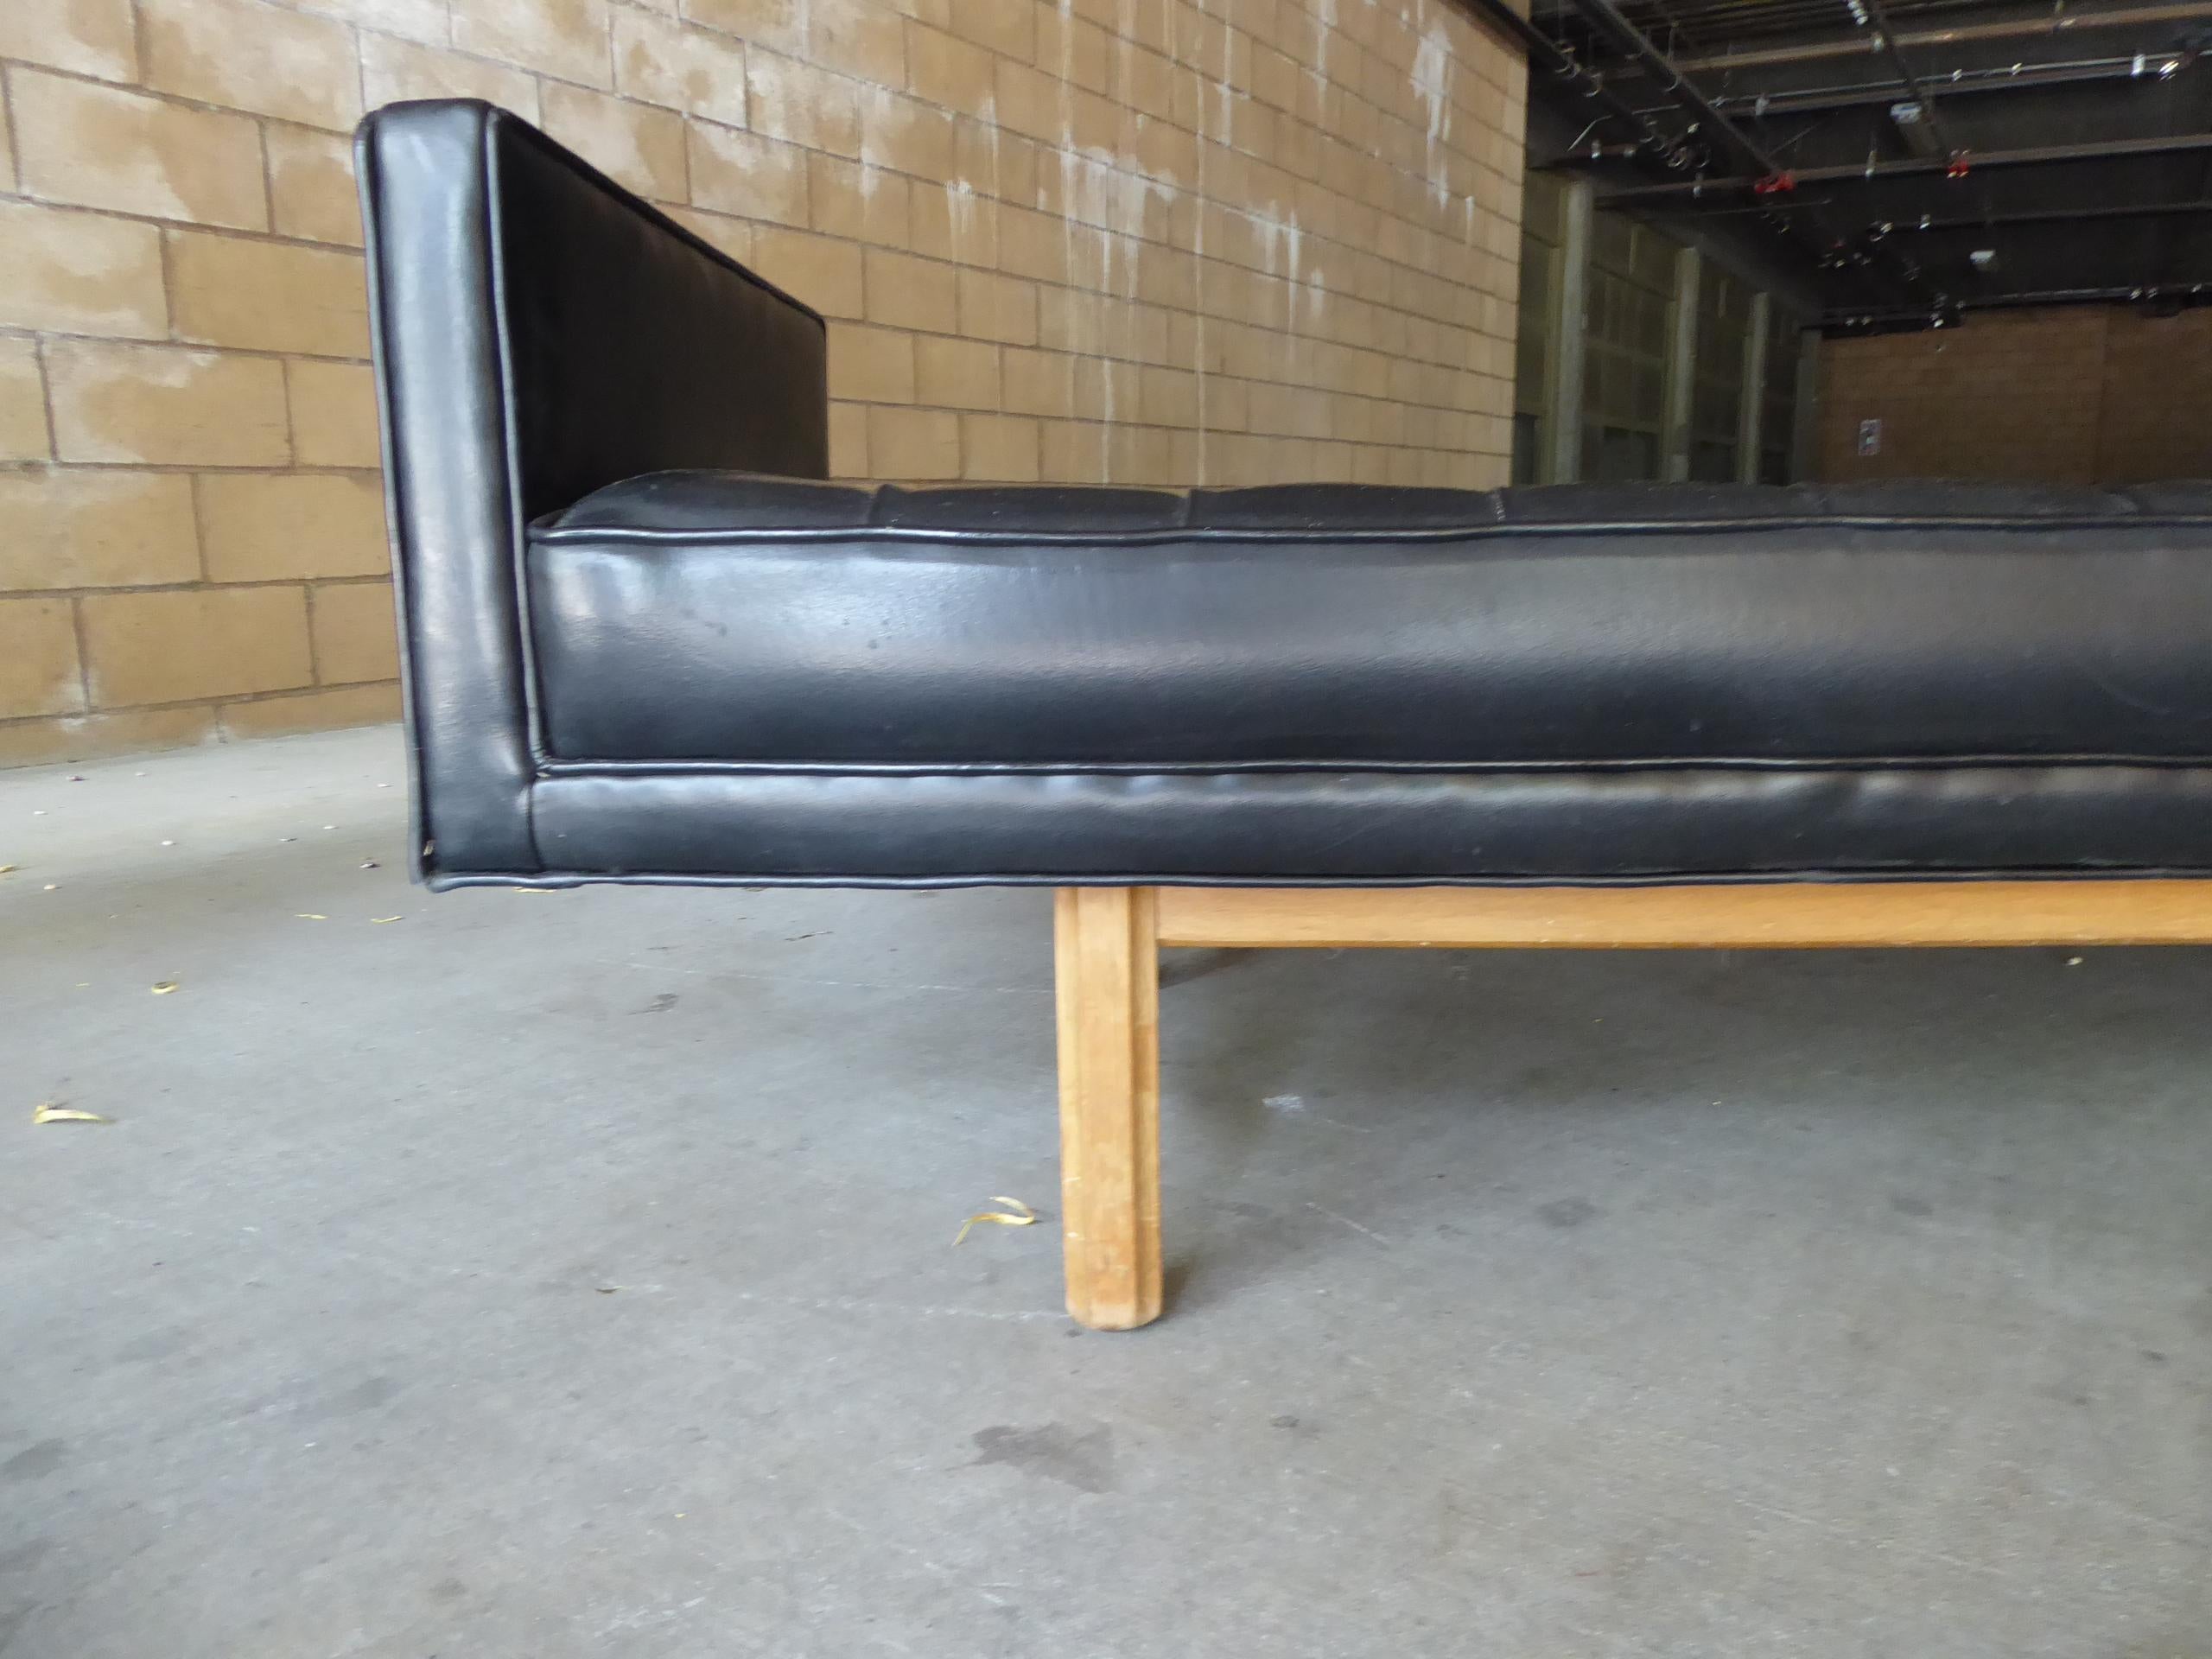 Mid-Century Modern Tufted Leather Daybed Attributed to the Dunbar Furniture Co, circa 1960s